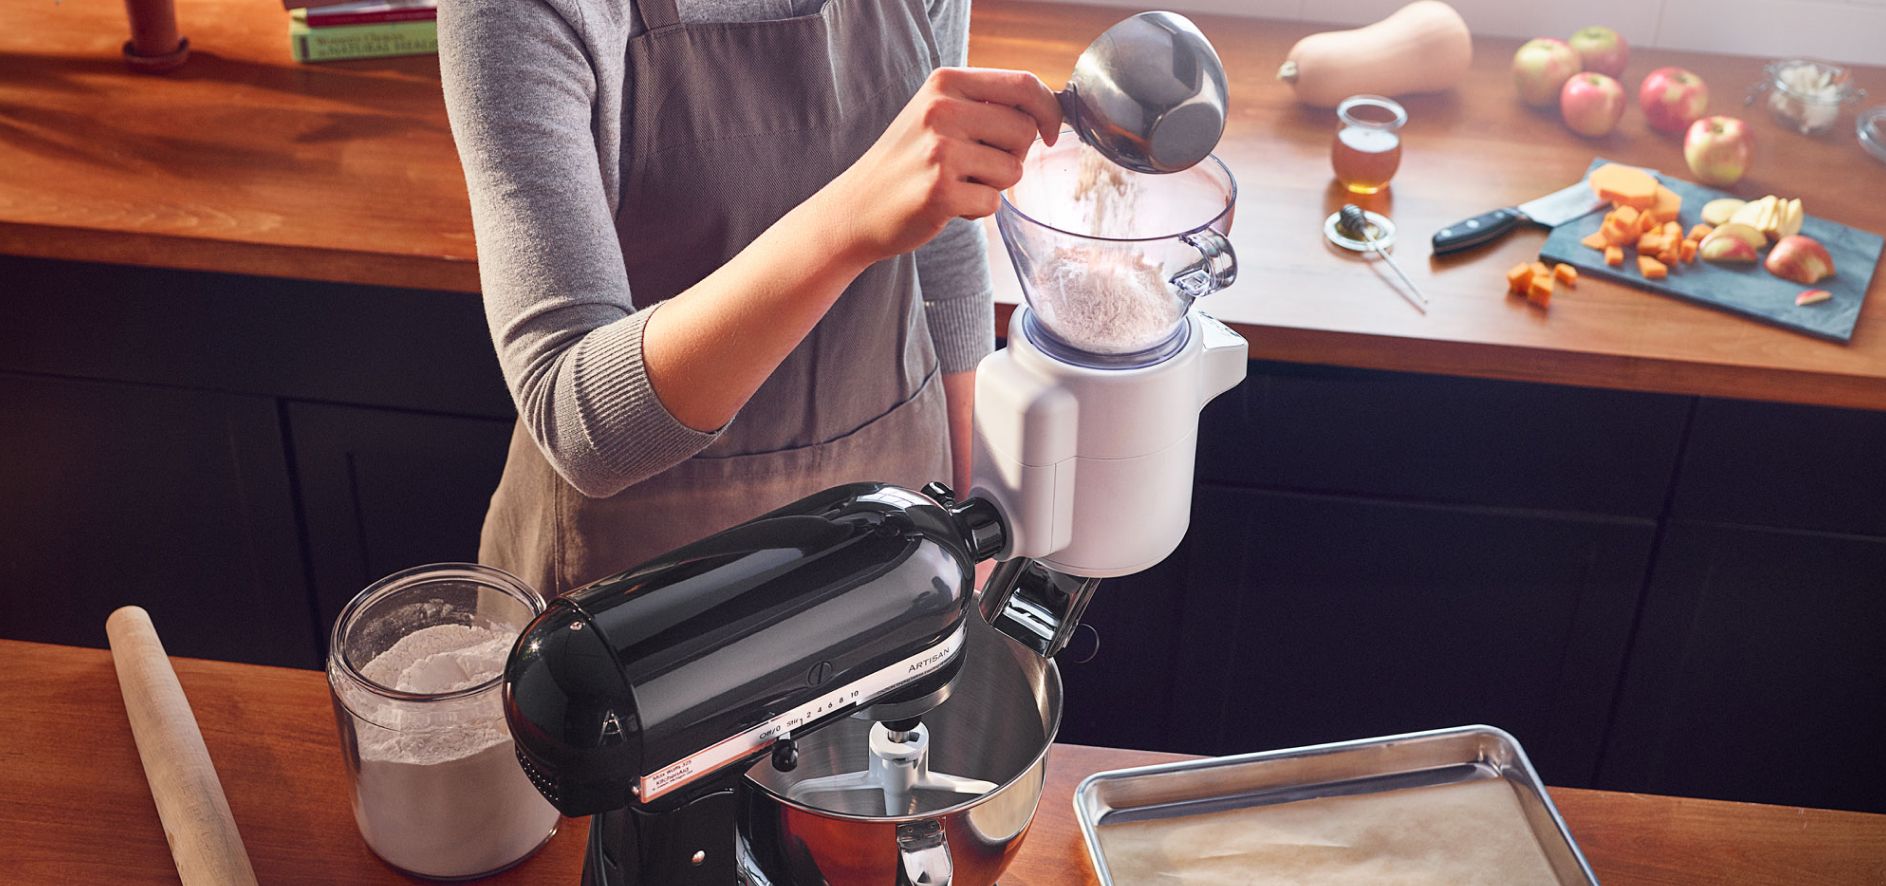 Person sifting flour in a stand mixer sifting attachment